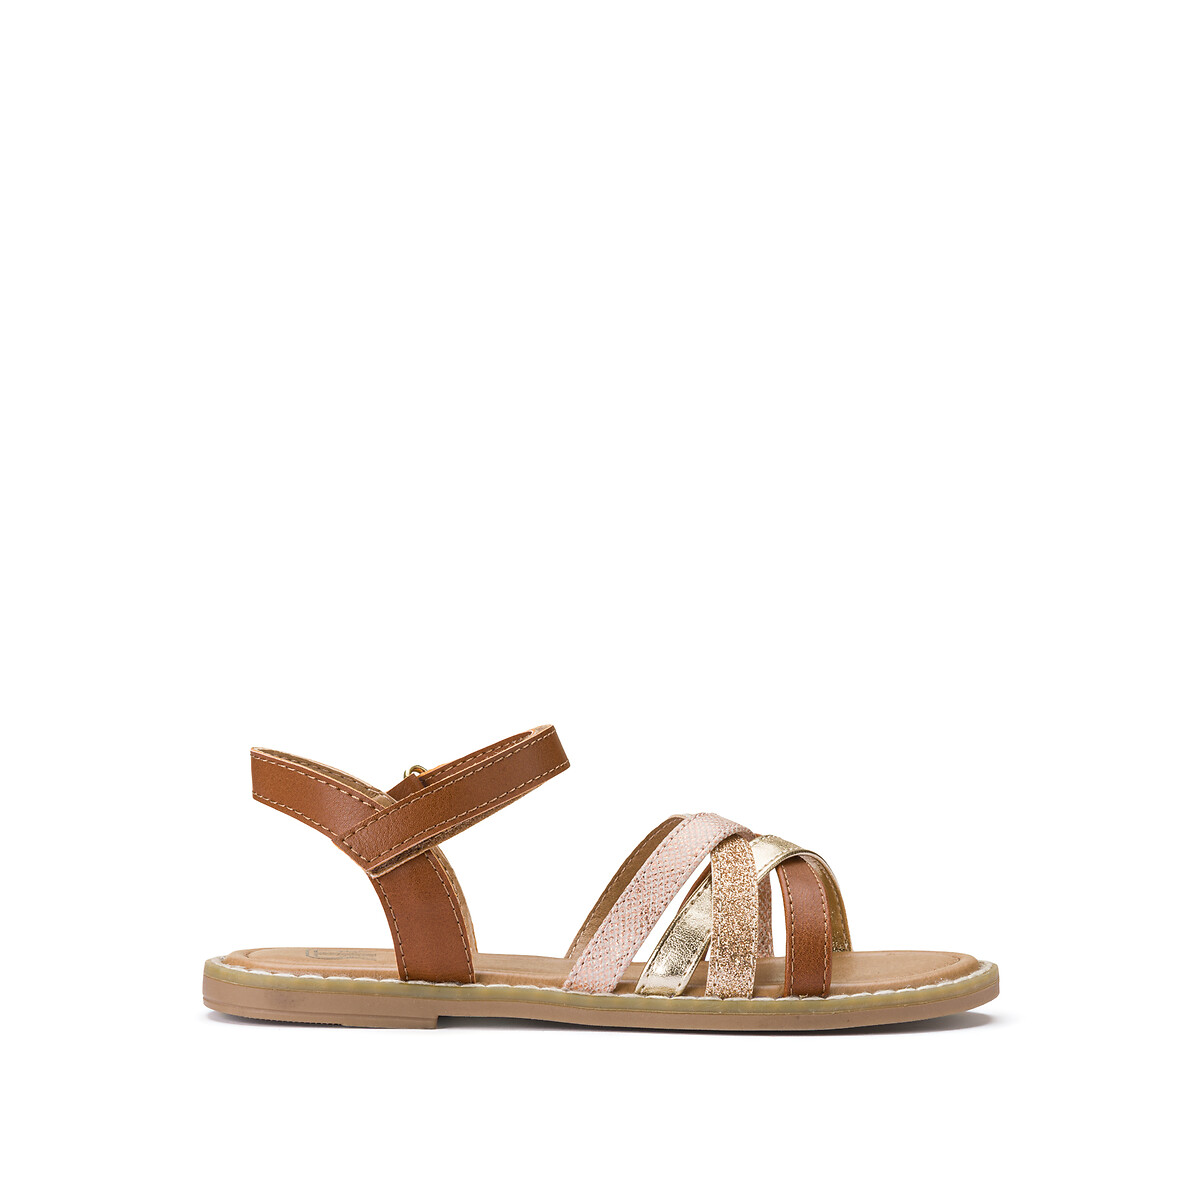 Kids Plaited Sandals with Touch ’n’ Close Fastening